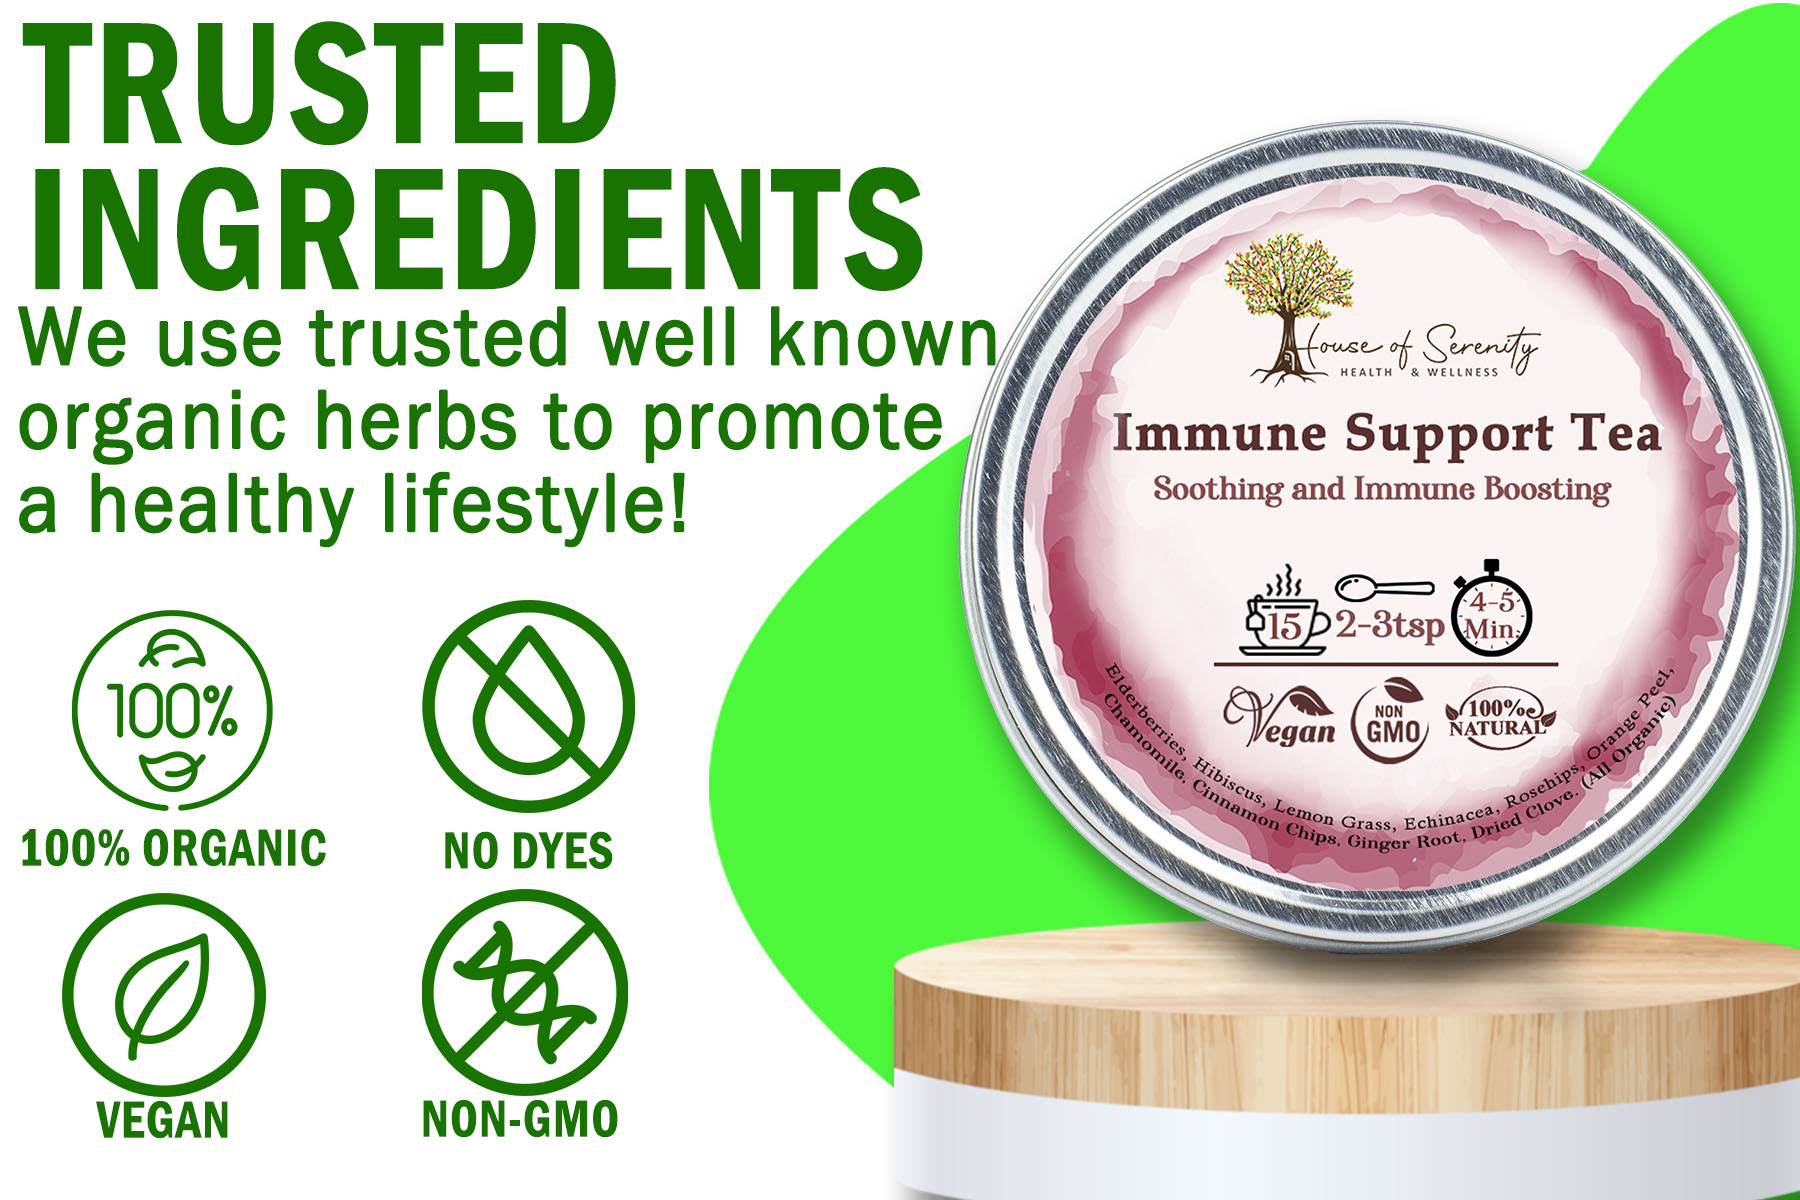 Immune Support Tea - House of Serenity Health and Wellness